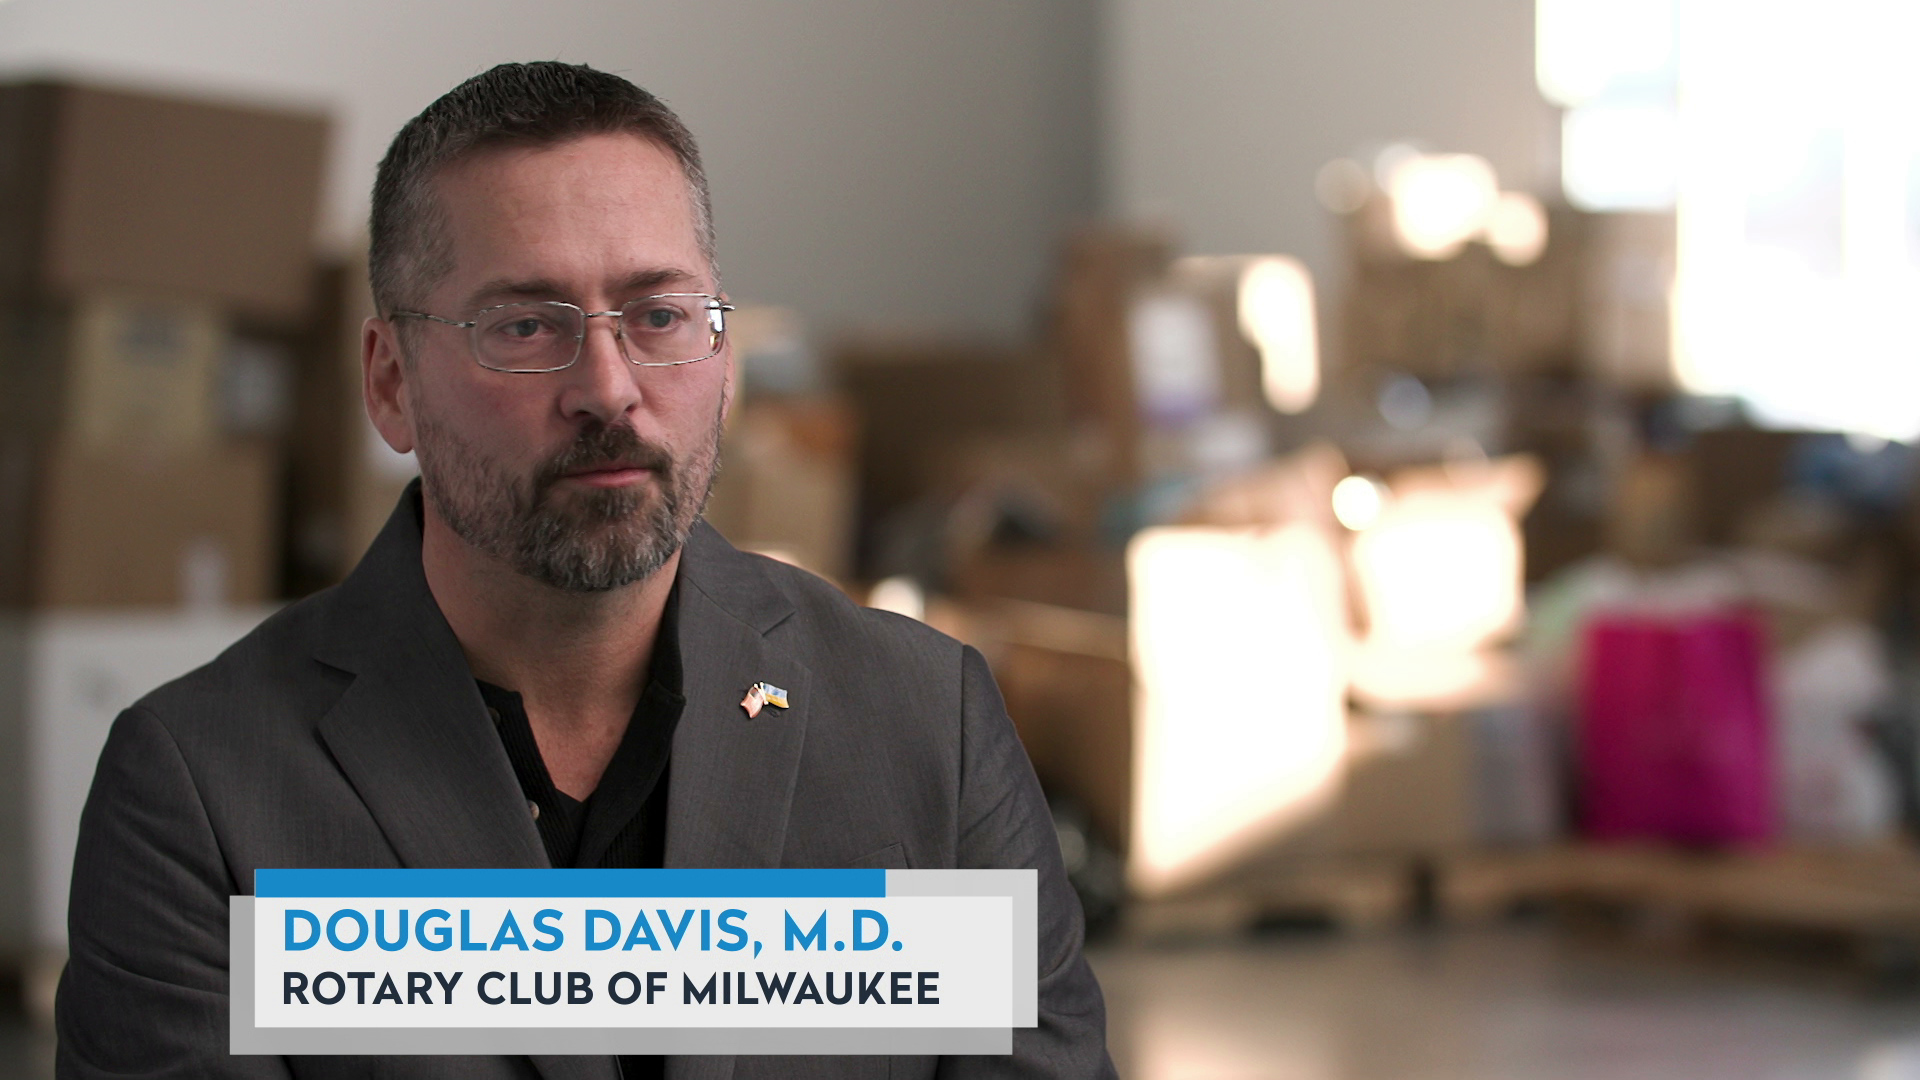 Douglas Davis sits in a large room with out-of-focus stacks of cardboard boxes and other items in the background, with a graphic at bottom reading "Douglas Davis, M.D." and "Rotary Club of Milwaukee."